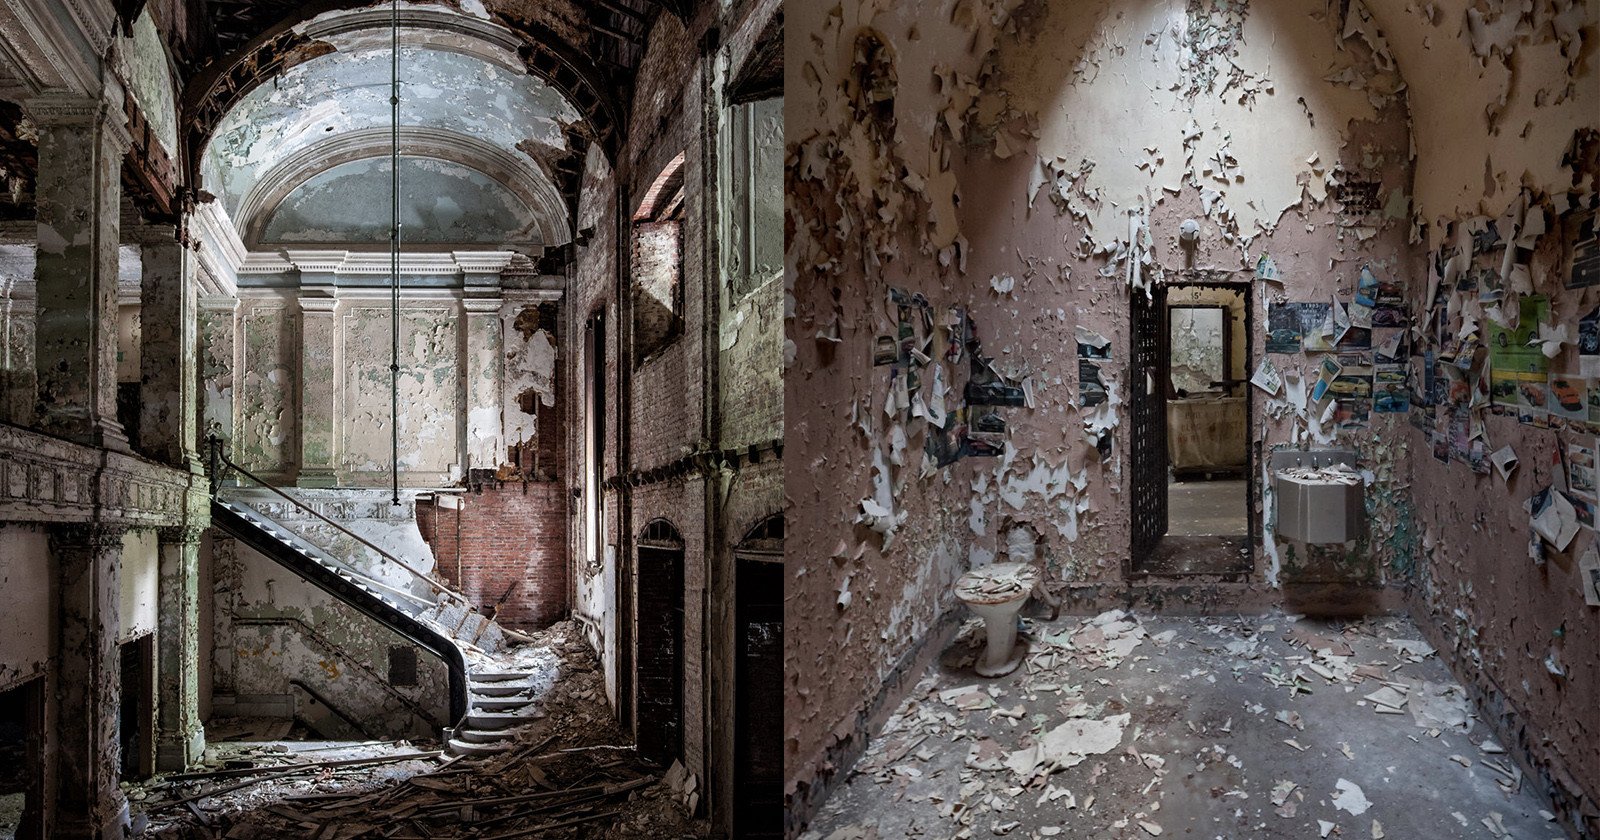  abandoned america photo series captures history forgotten places 